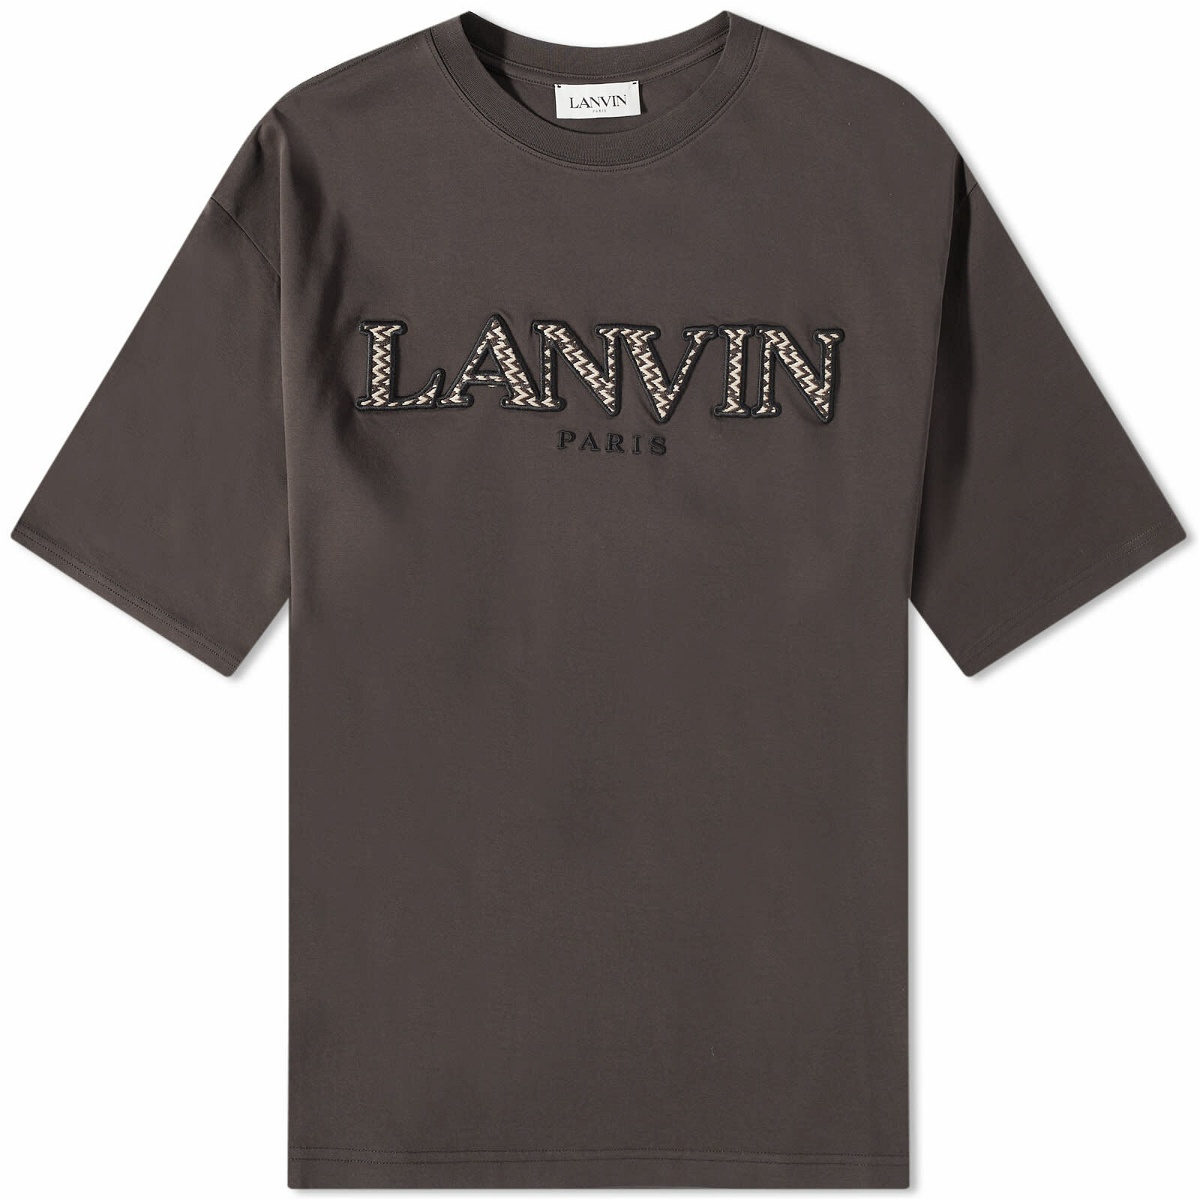 Lanvin Men's Curb Embroidered T-Shirt in Ebony Lanvin